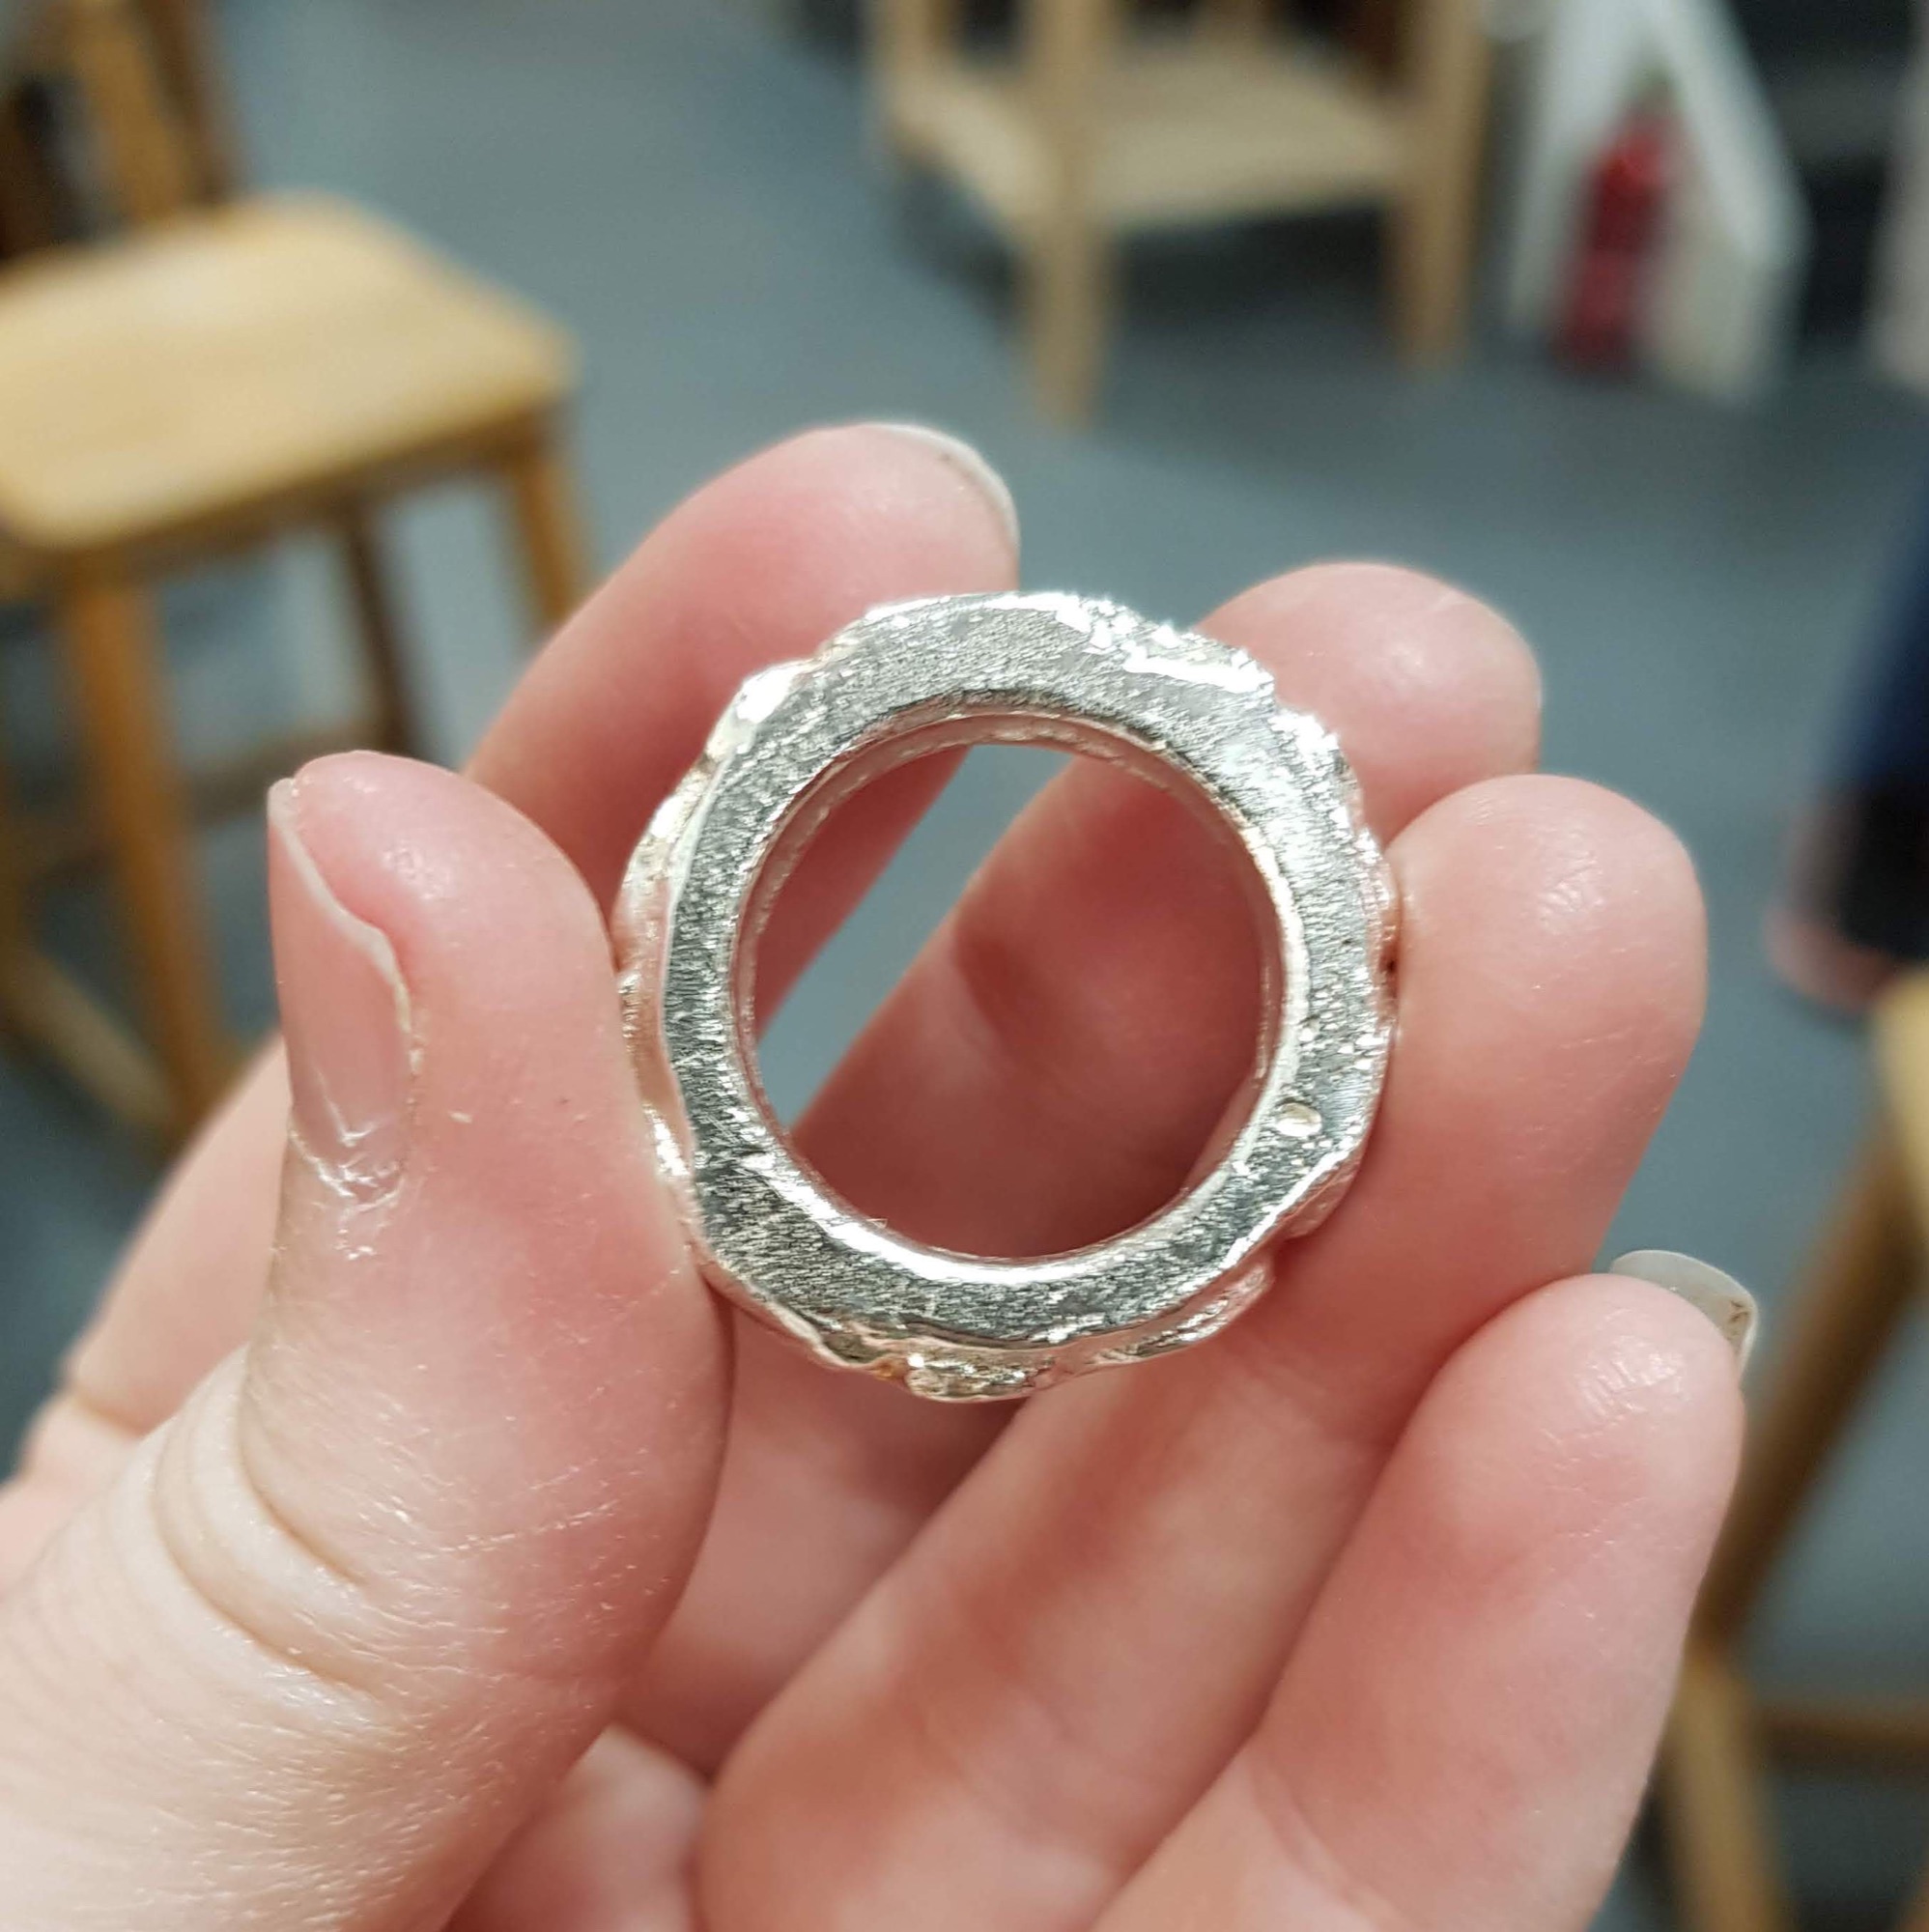 Learn how to cast your own ring